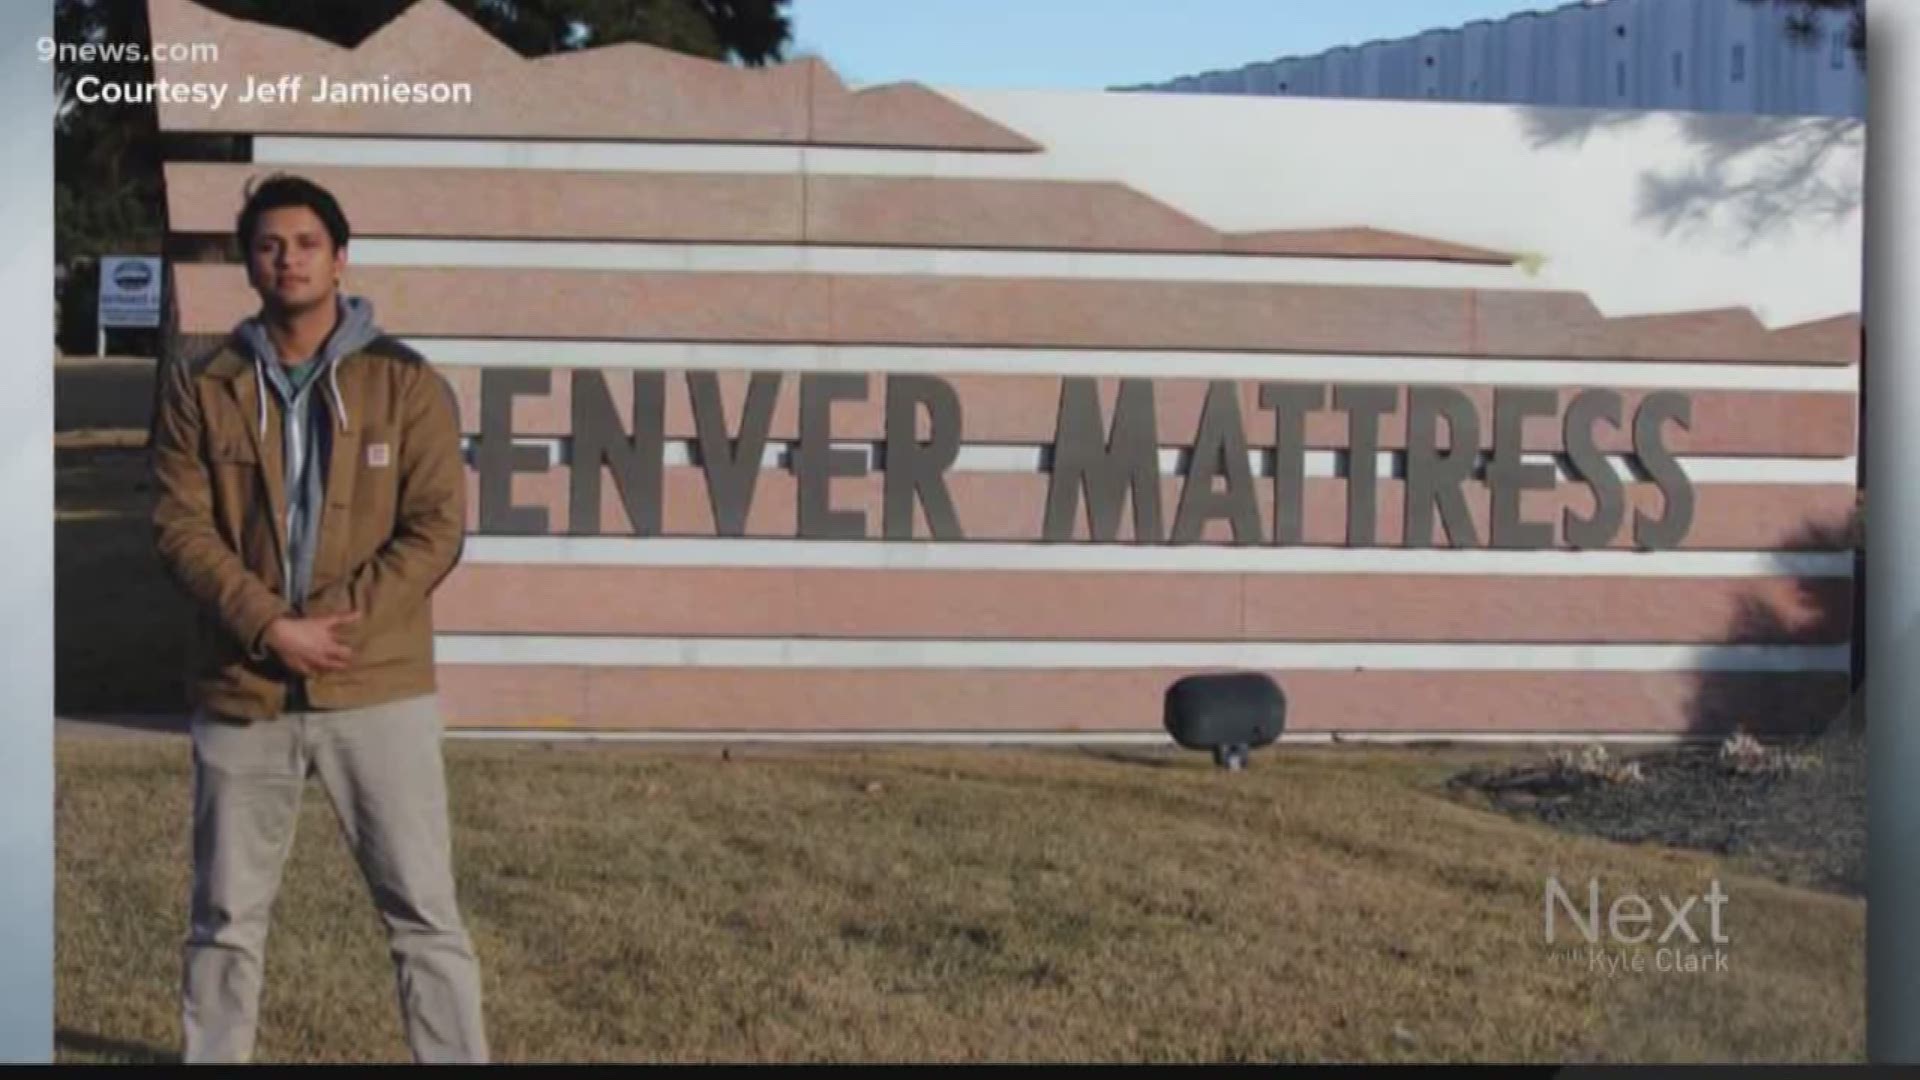 When he had a long layover in Denver on Saturday, he knew exactly what to do - go take pics in front of 'Enver' signs. 